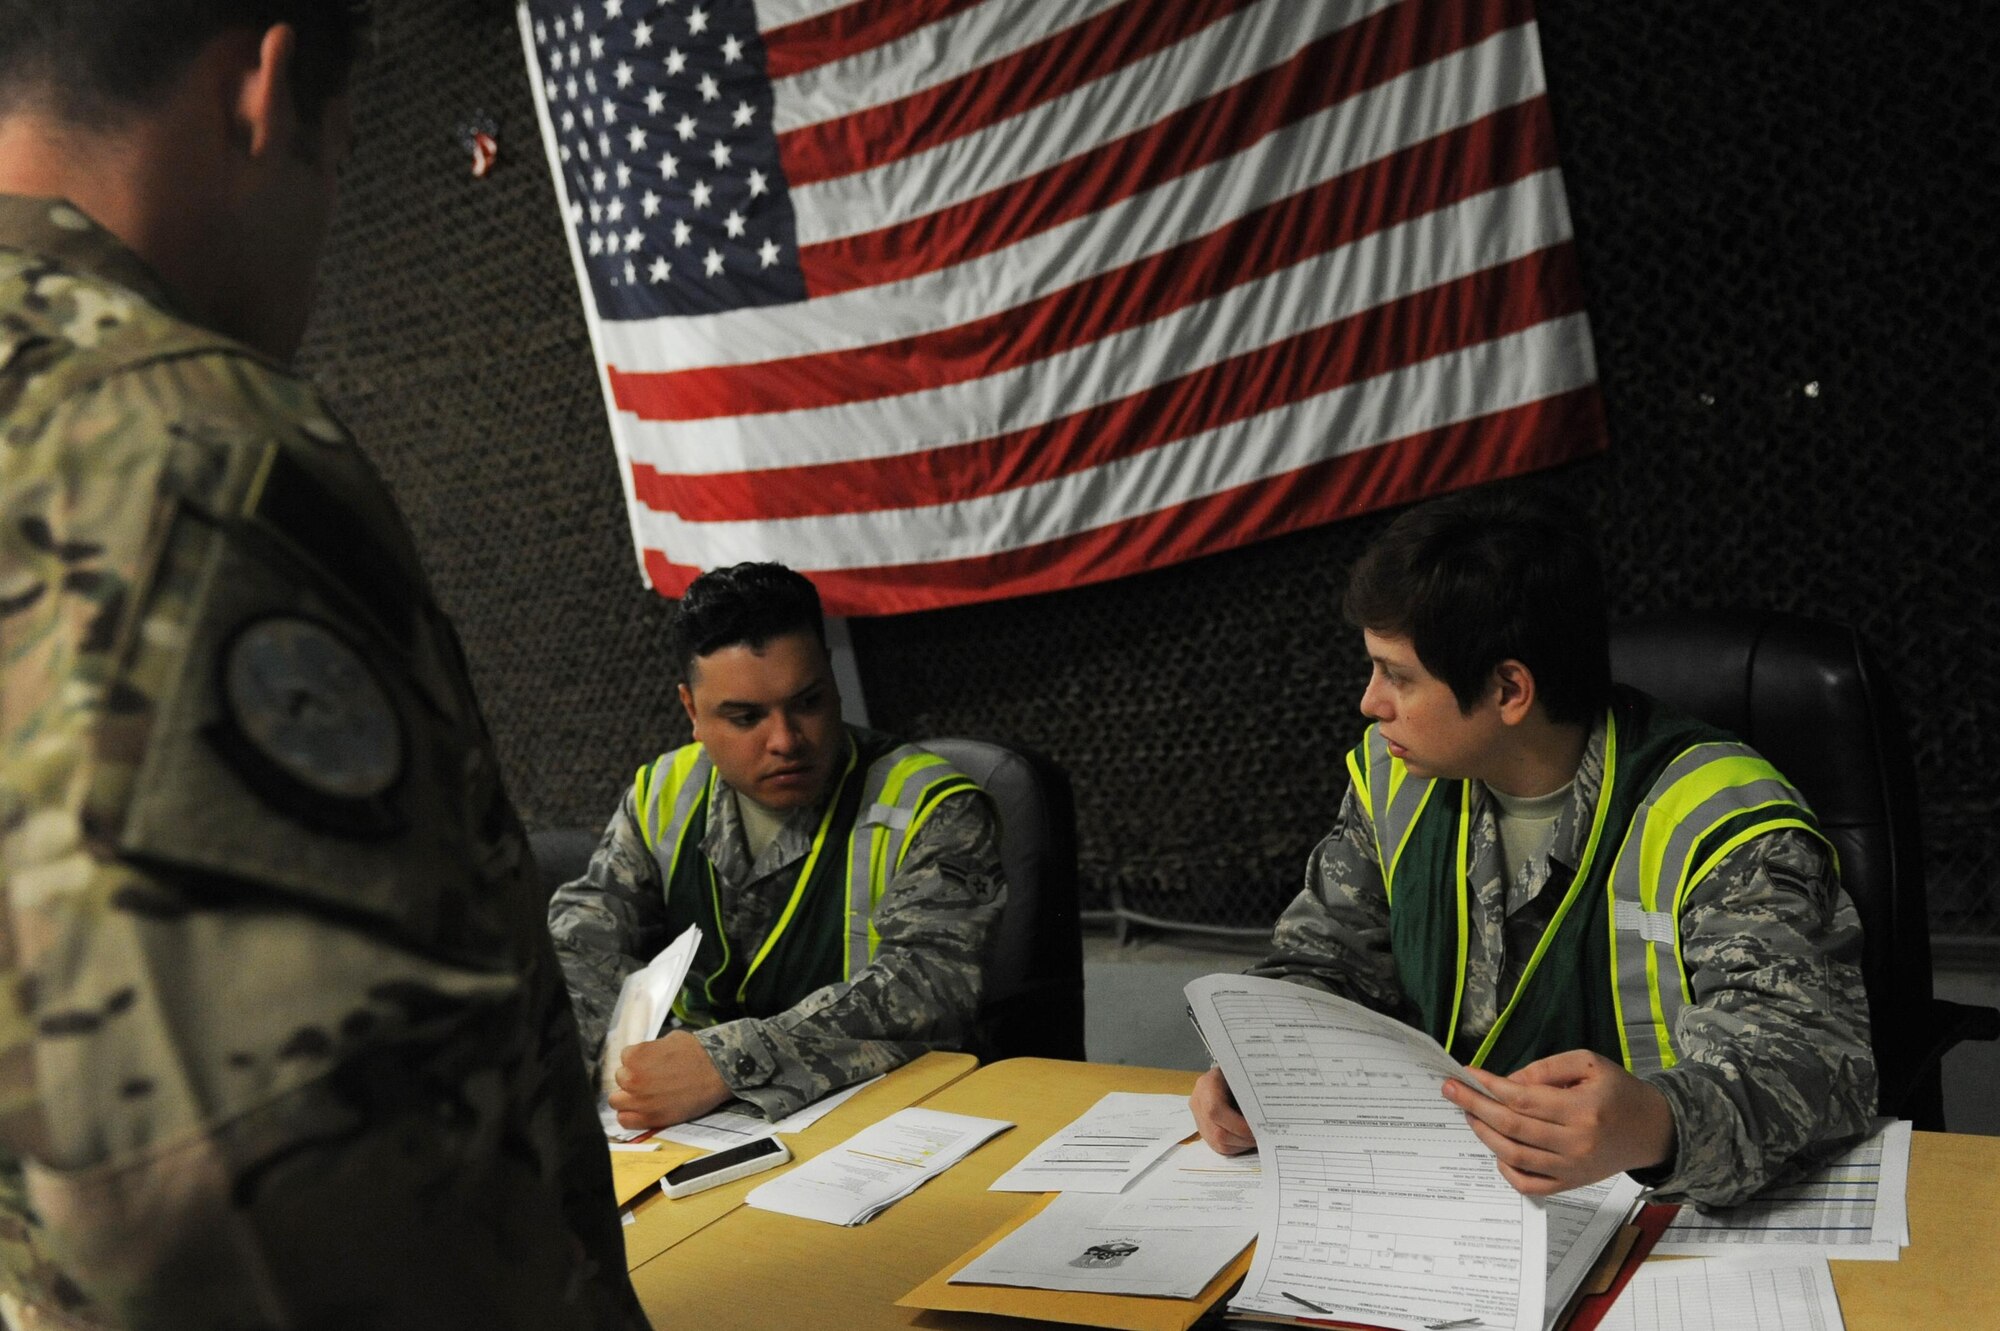 U.S. Air Force Airman 1st Class Anthony Licea, 19th Force Support Squadron decorations technician, and U.S. Air Force Airman 1st Class Xochitl Medina, 19th Force Support Squadron relocations technician, review paperwork during a personnel deployment function line Sept. 1, 2016, at Little Rock Air Force Base, Ark. During a PDF line, Airmen have their records reviewed prior to deploying. (U.S. Air Force photo by Senior Airman Mercedes Taylor) 